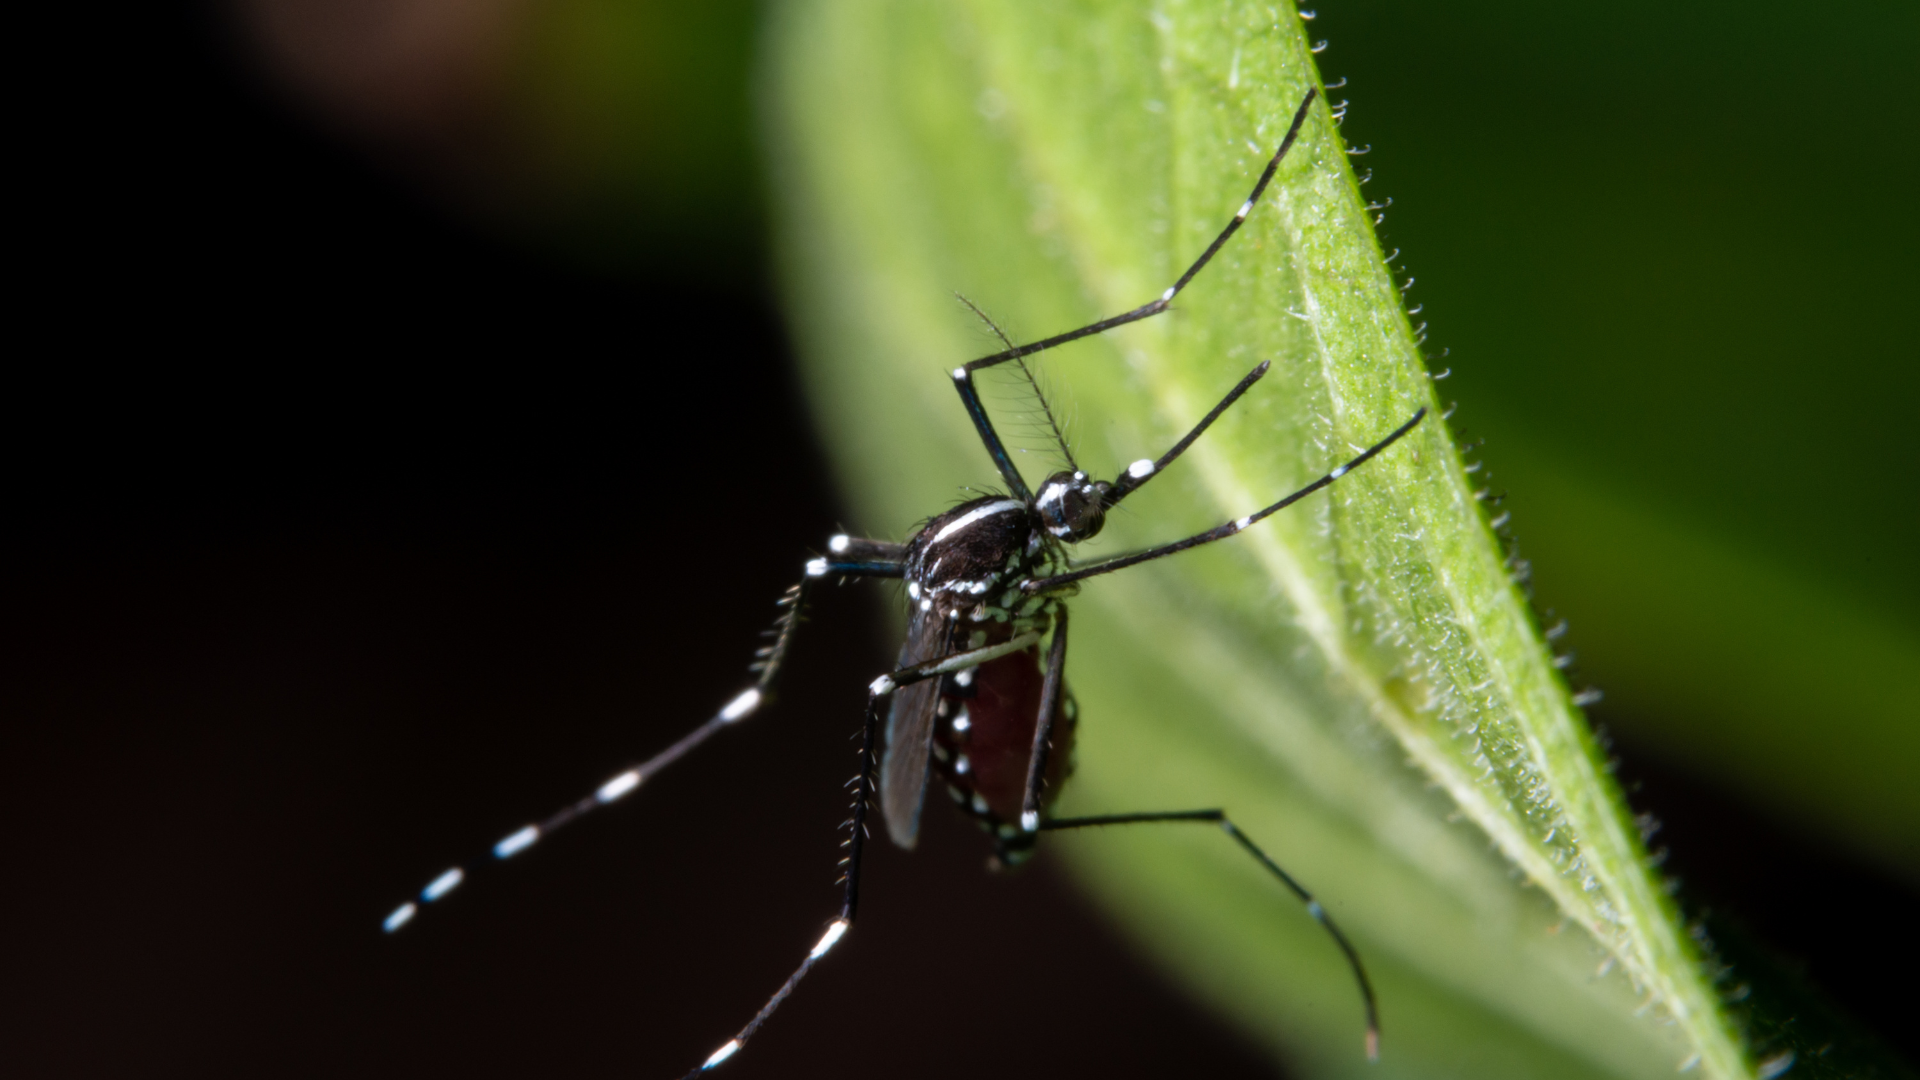 Riverside County reports first human cases of West Nile this year